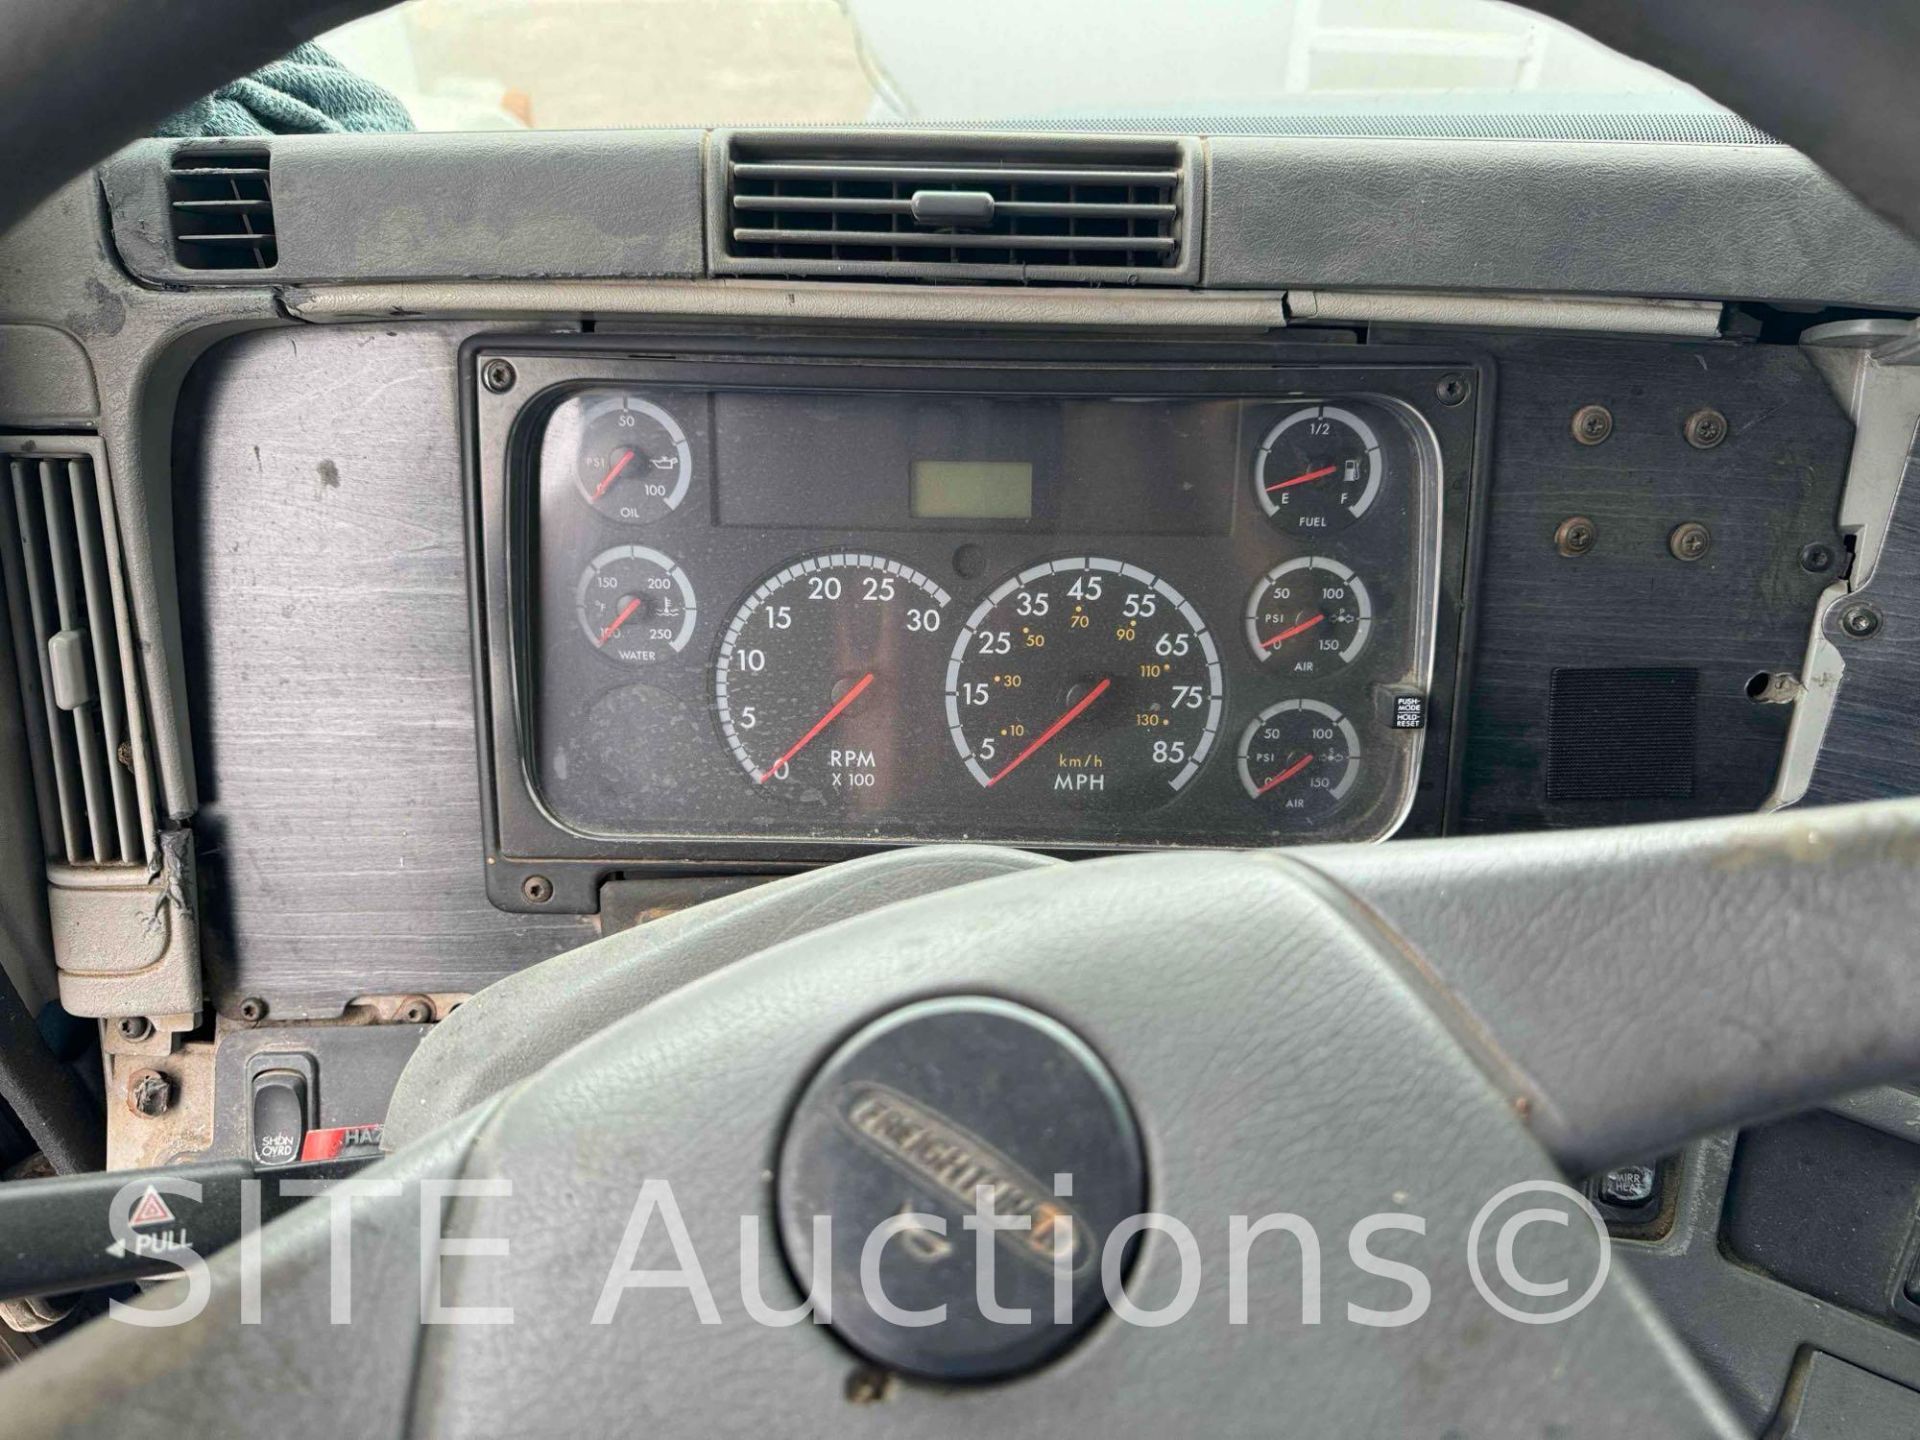 2004 Freightliner Columbia T/A Fuel Truck - Image 36 of 36